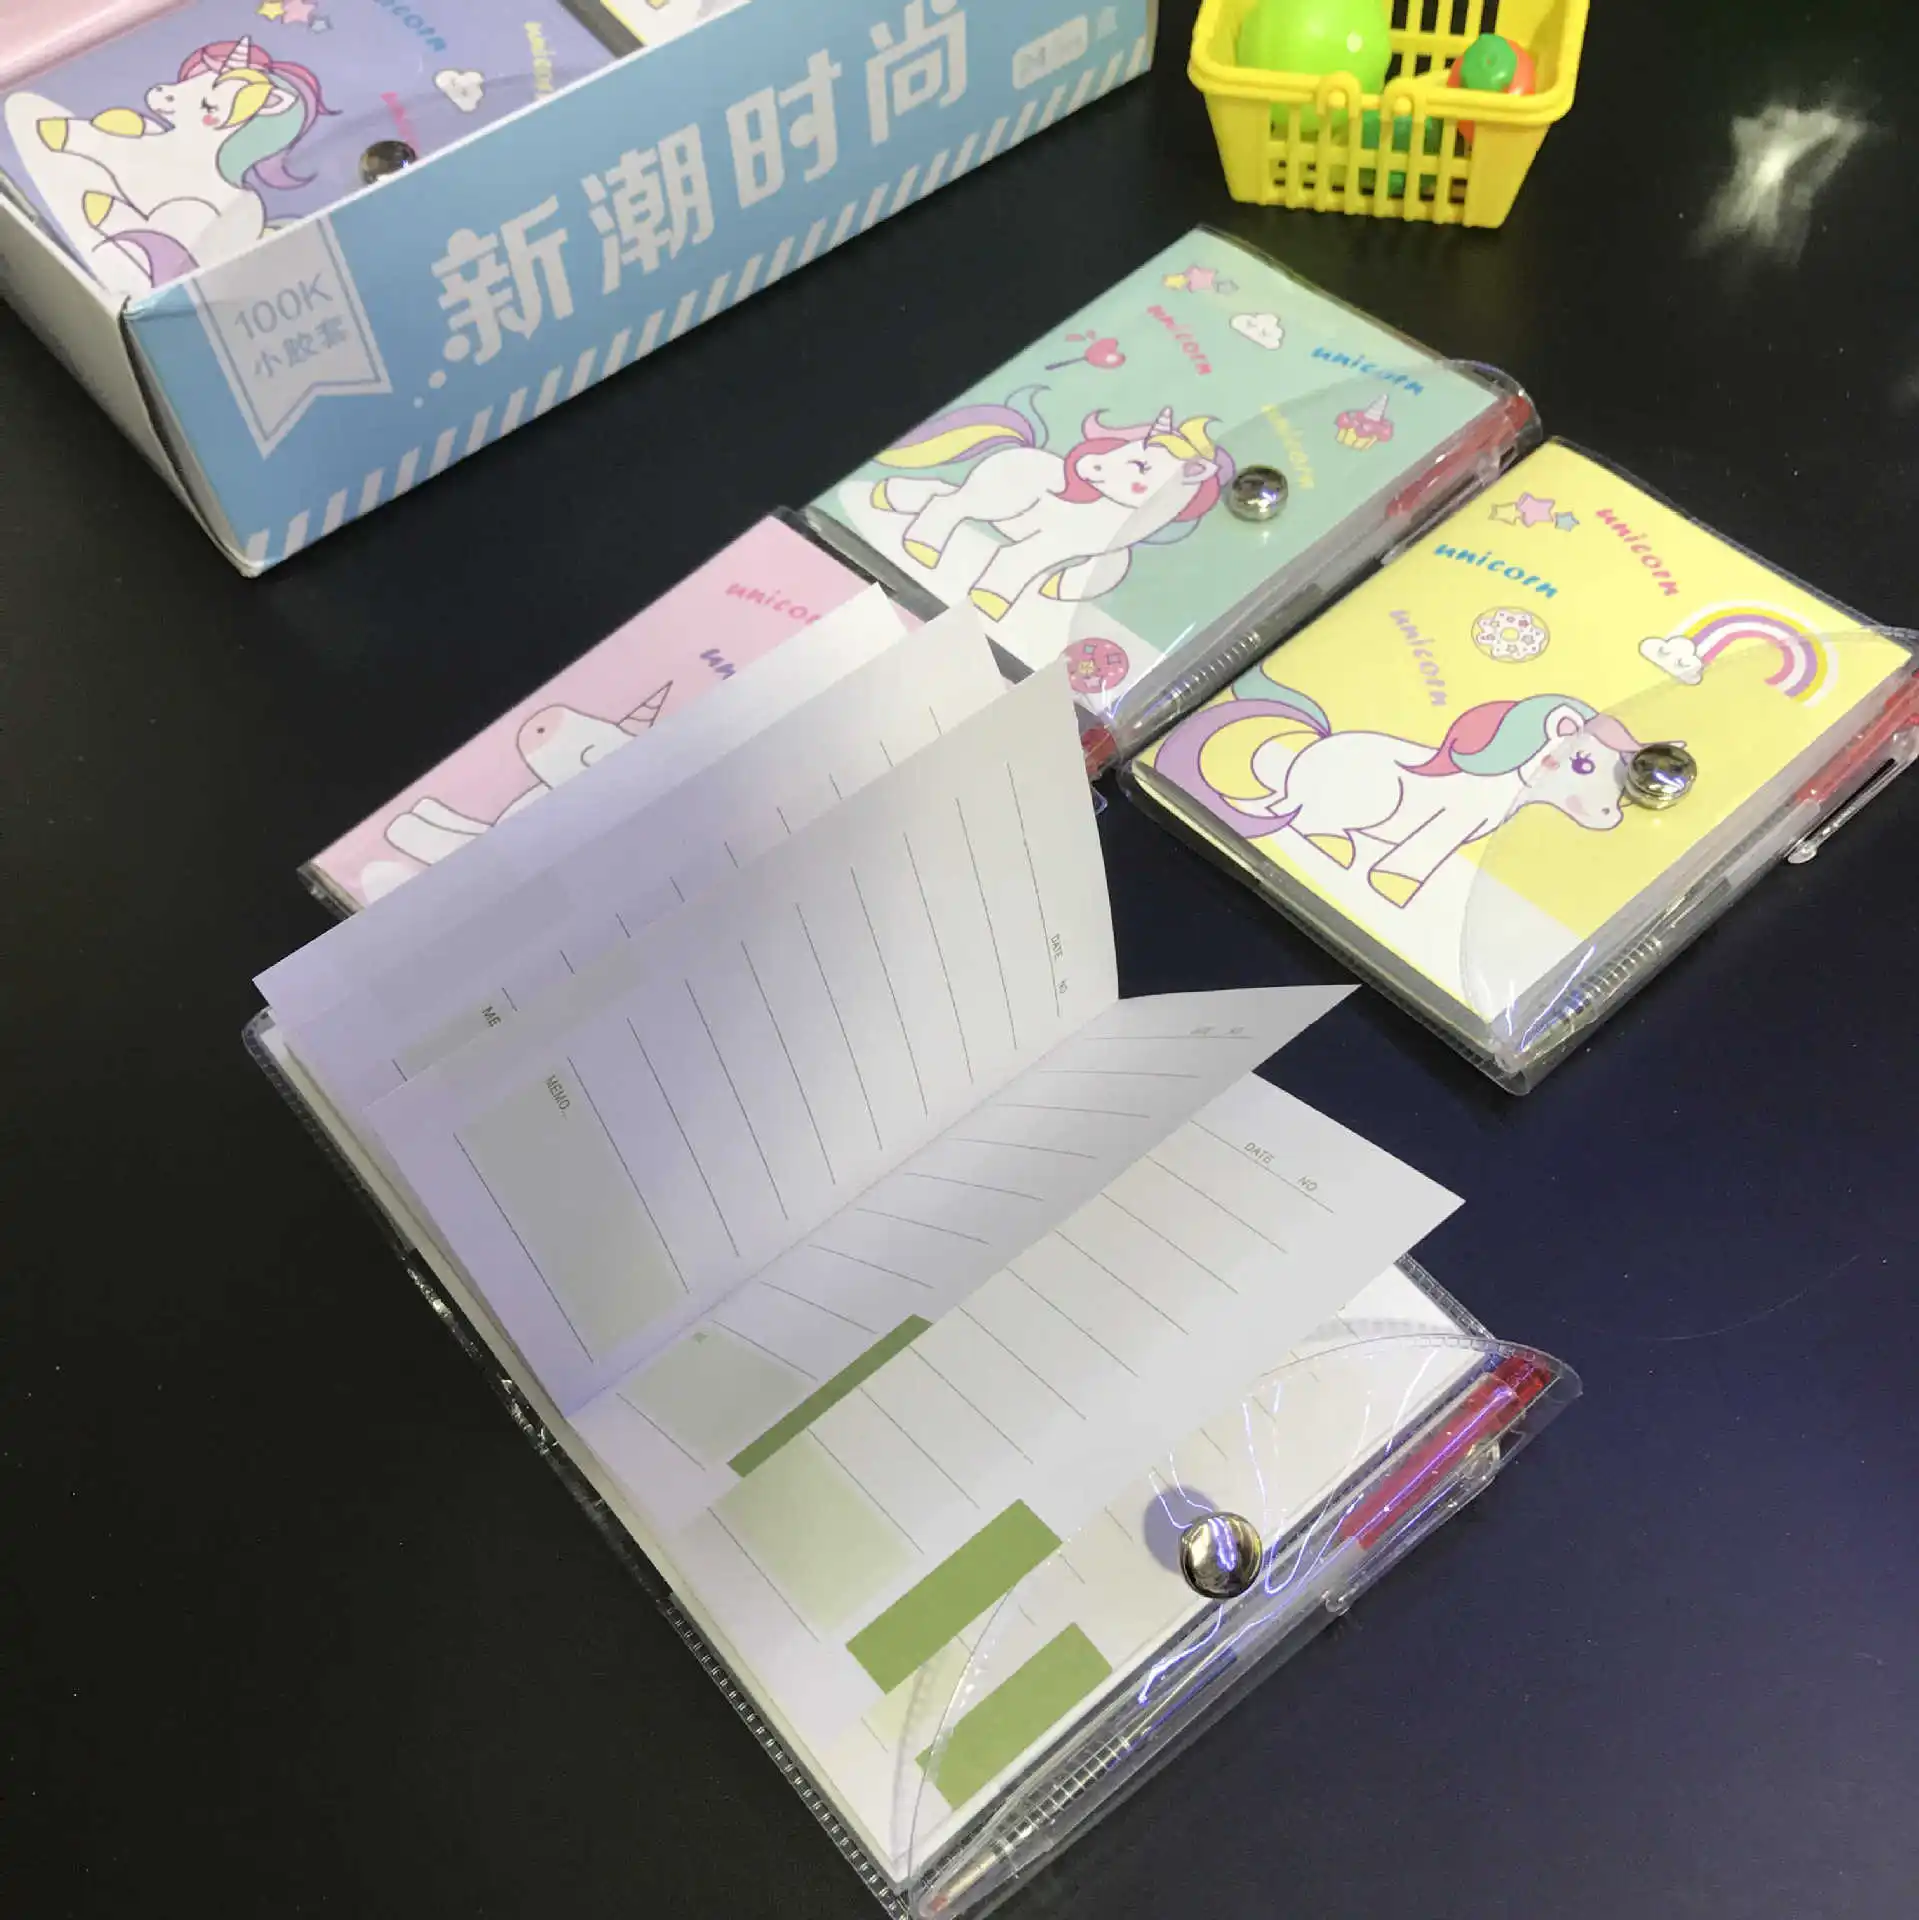 

1PC Cute Unicorn Memo Pad Cartoon Notepads With Pen For Kids Girls Gift Writing Sticky Notes Office Stationery School Supplies